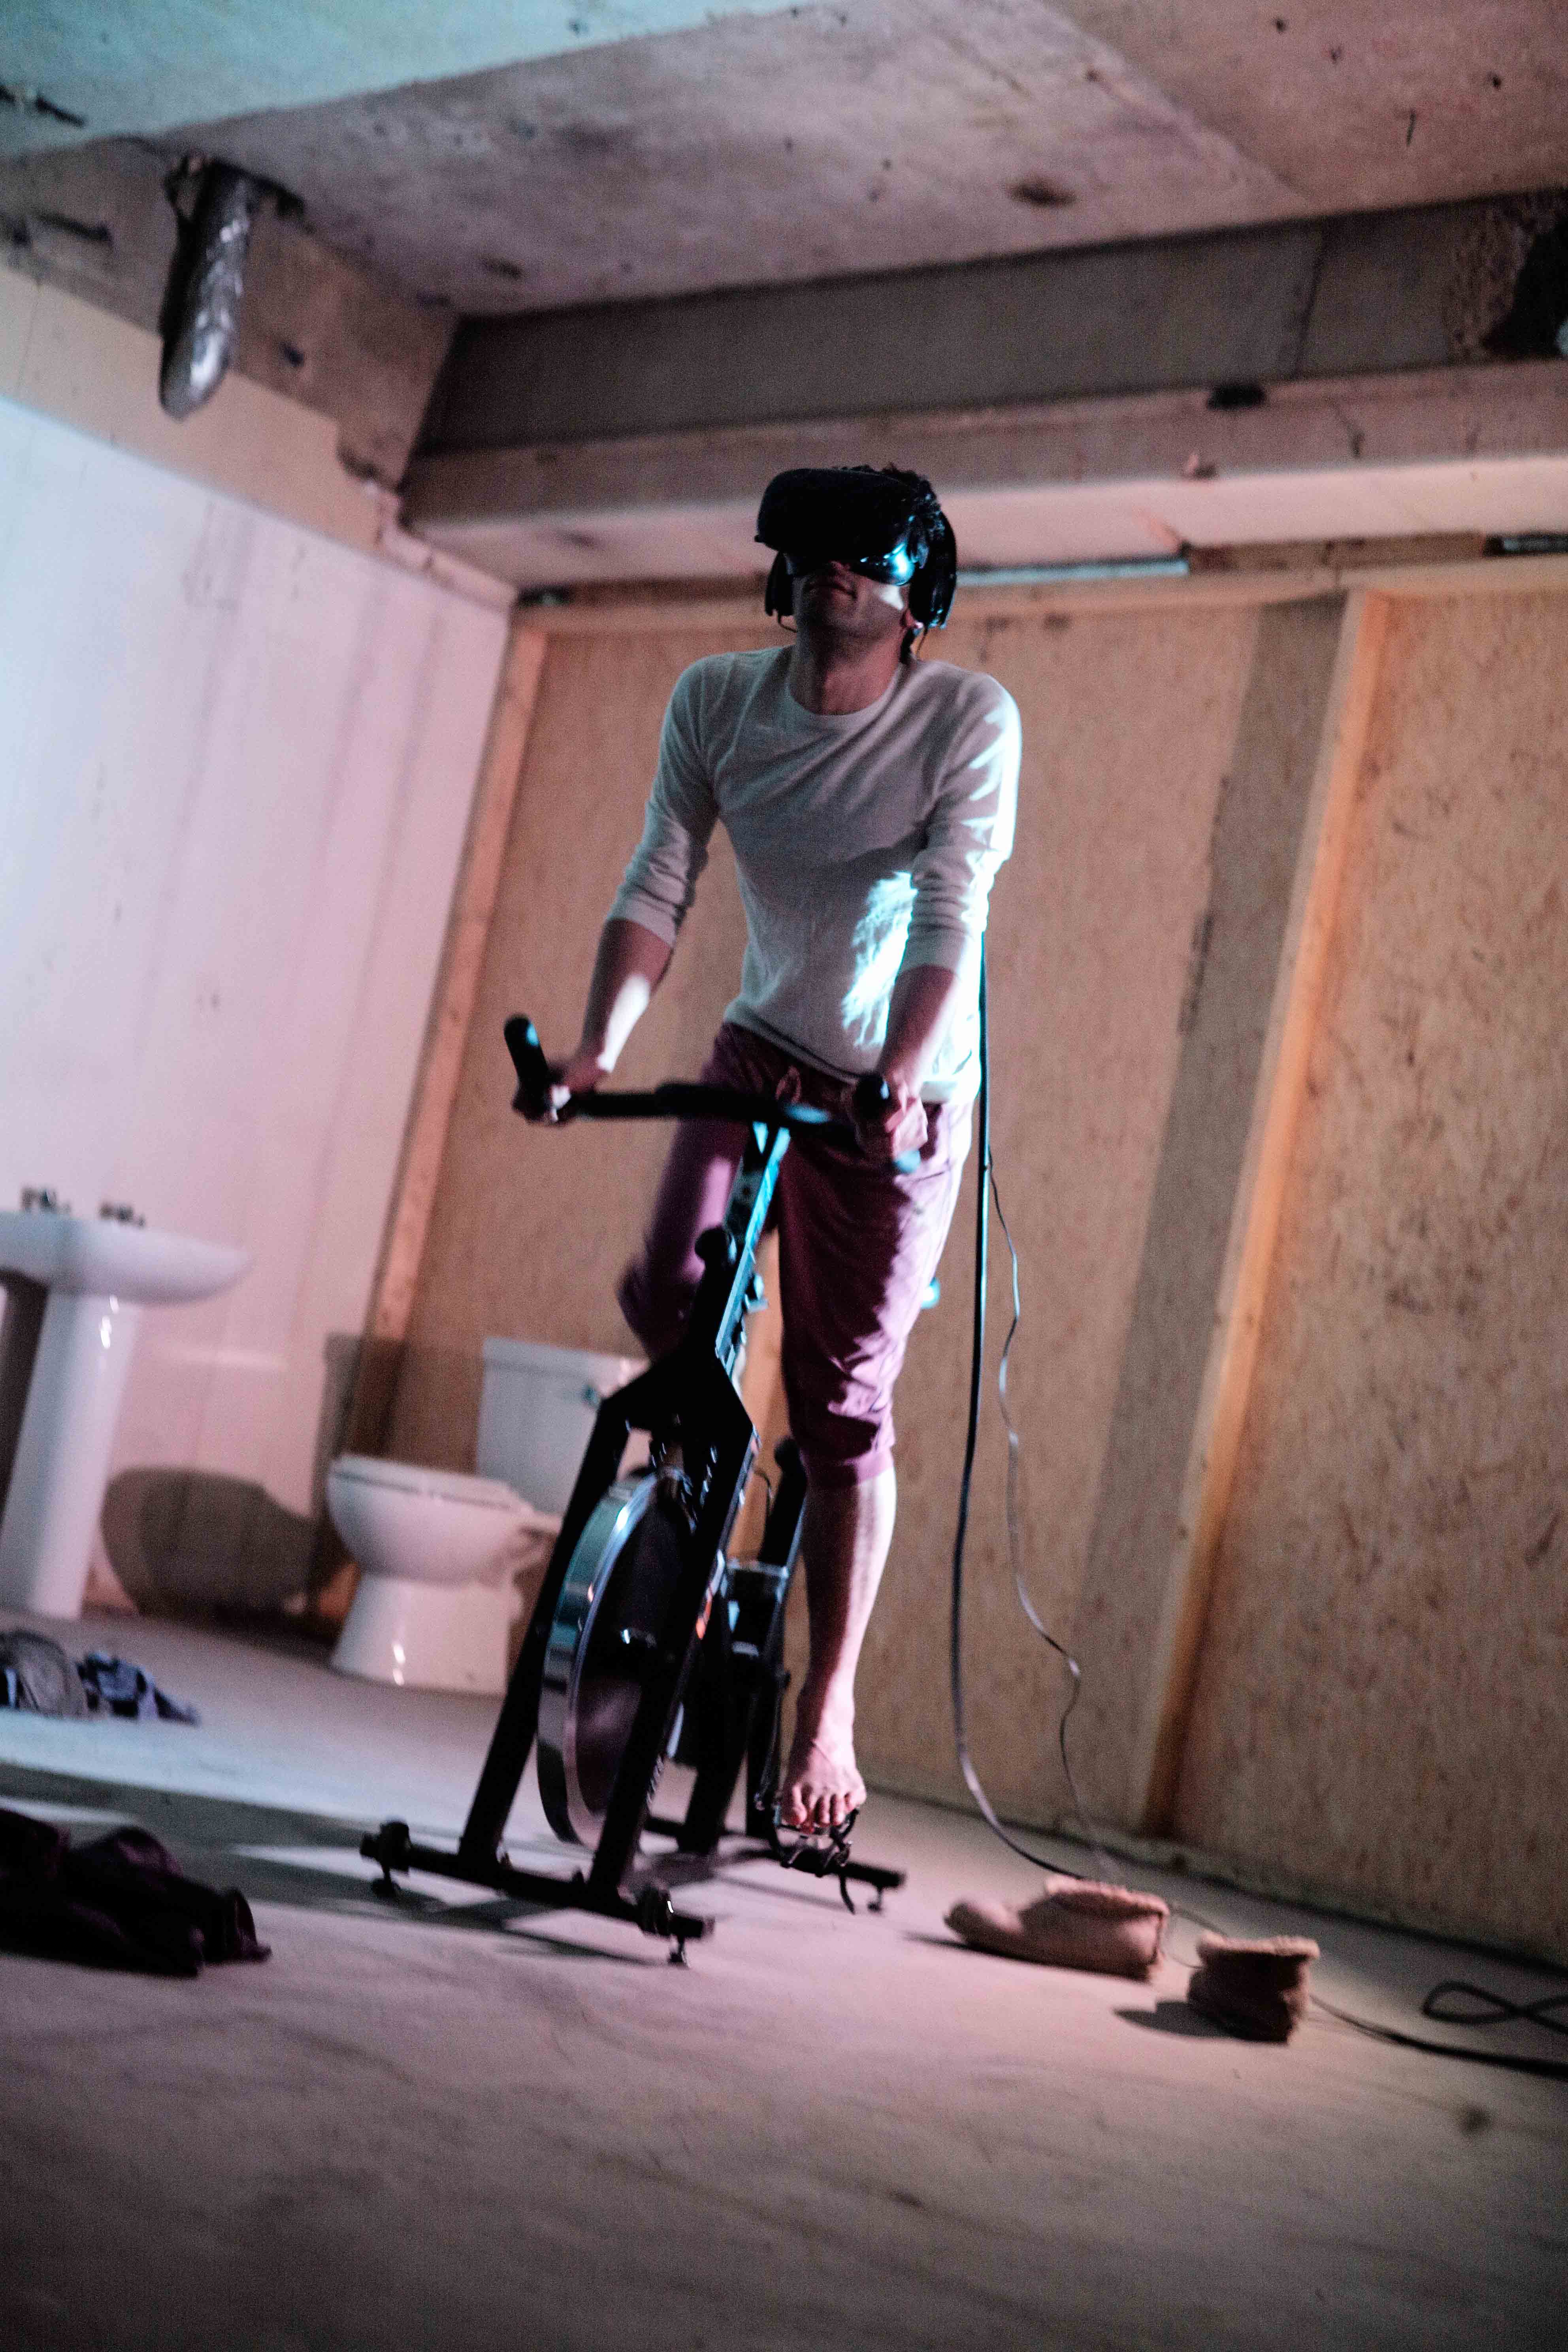 An action shot of the artist wearing the VR headset whilst using the exercise bike.